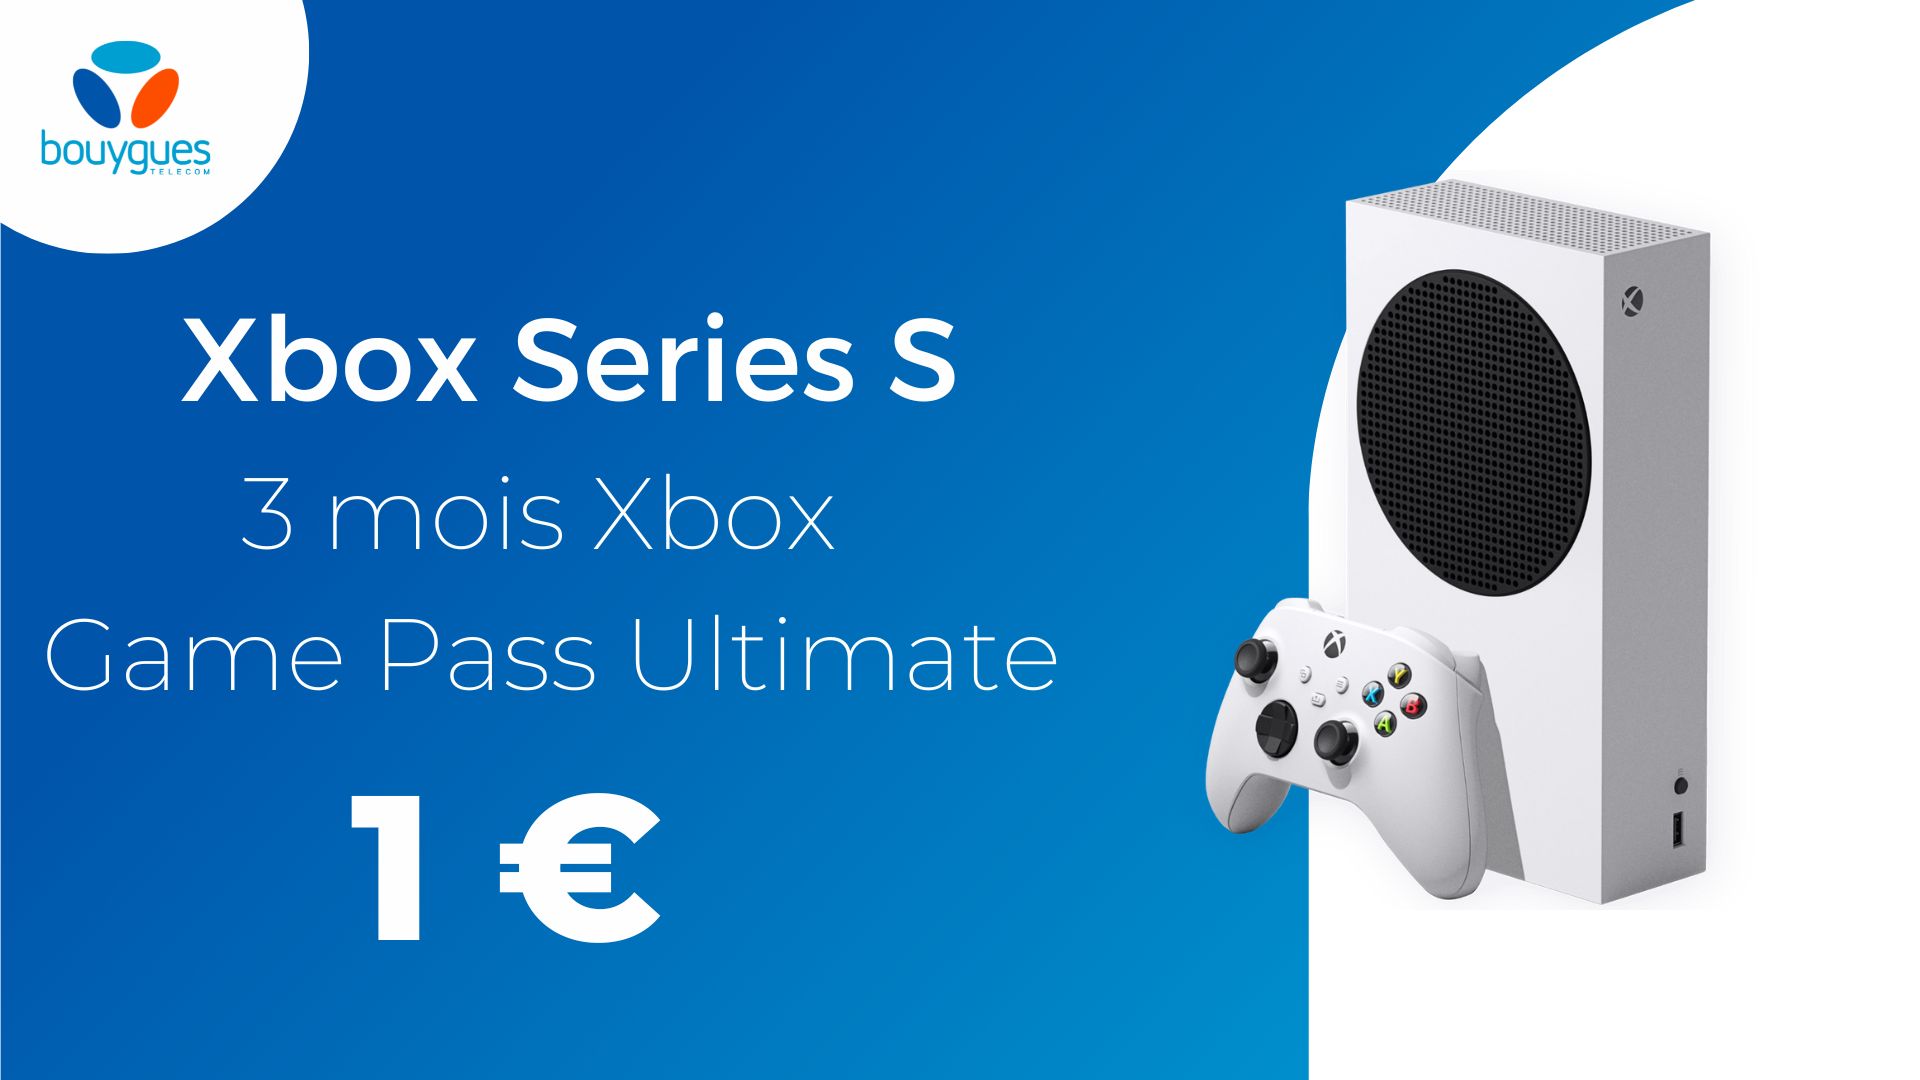 An Xbox Series S for 1 euro?  It's possible with Bouygues Telecom fiber [Sponso]